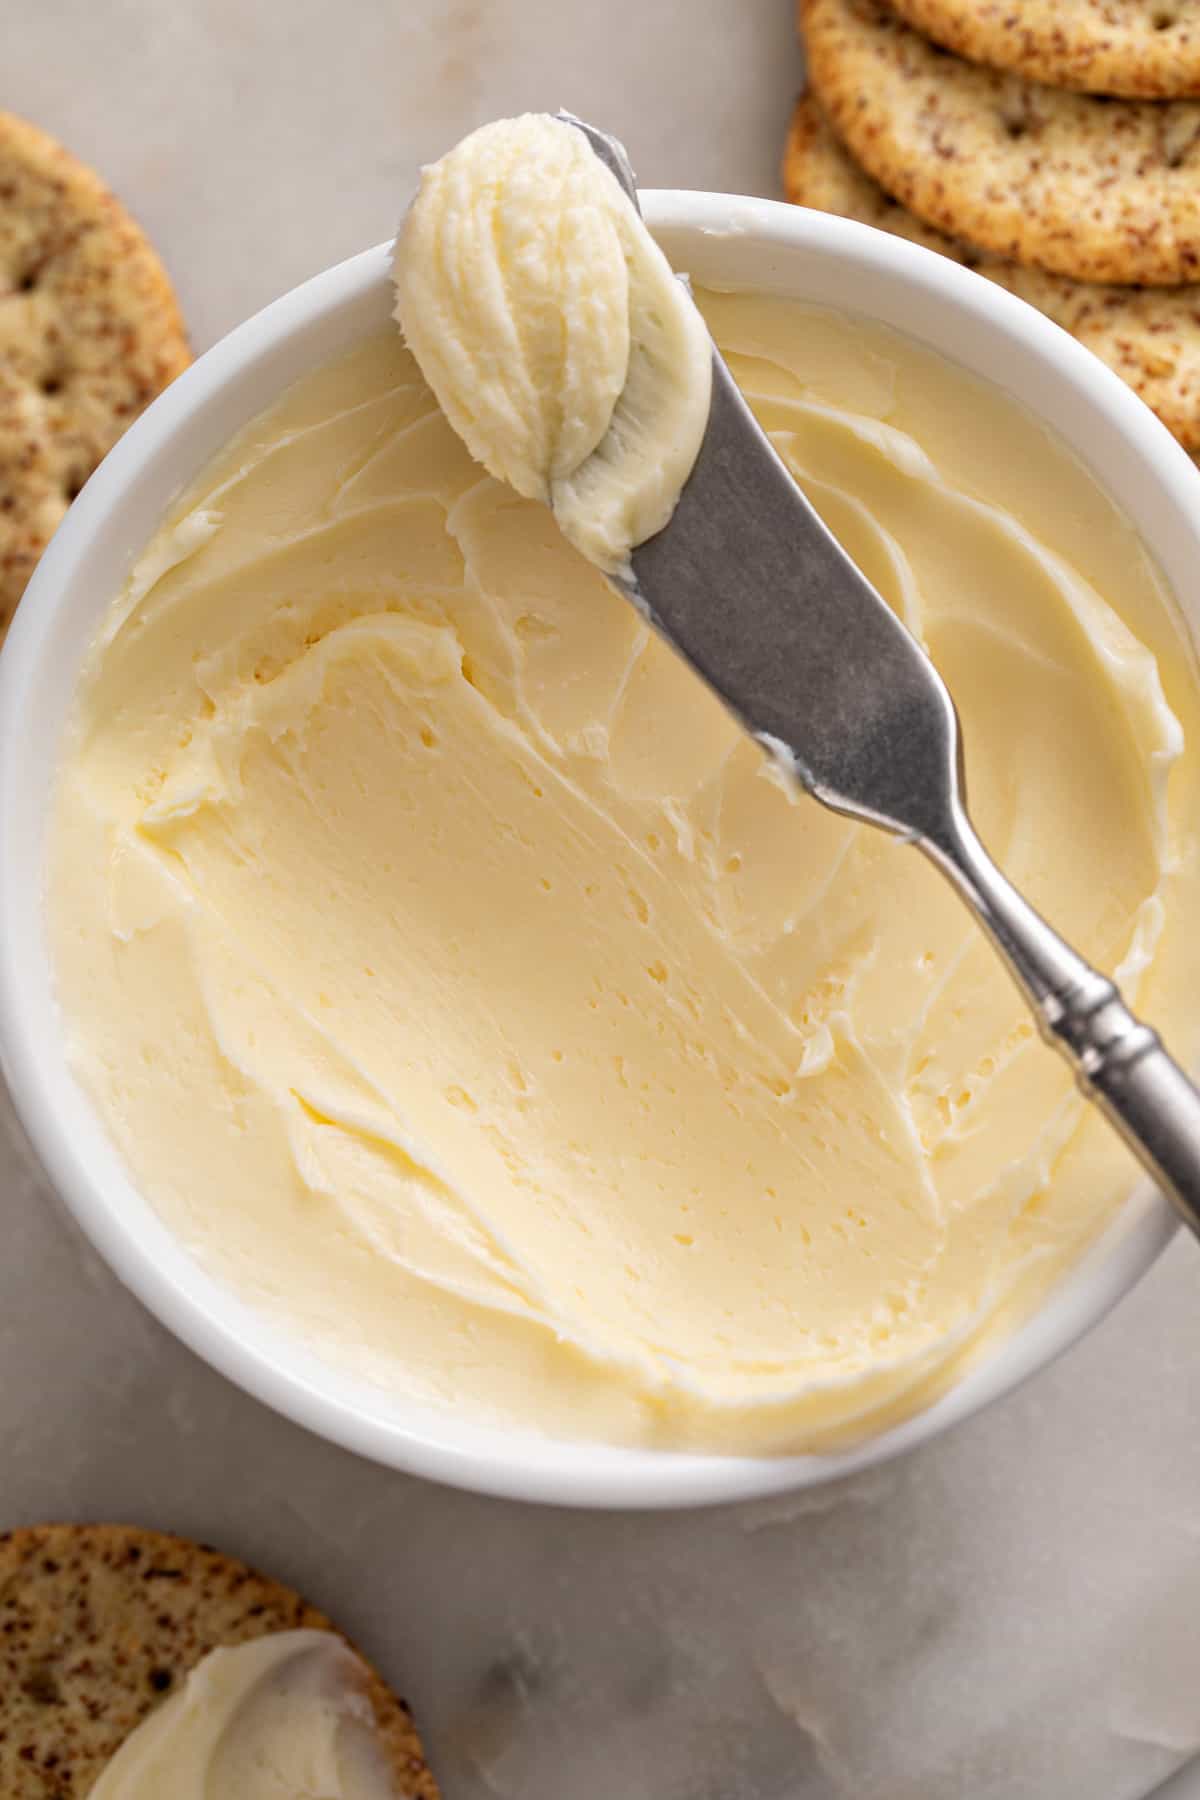 Close up of a bowl of homemade butter. A butter knife with some butter on it is propped on the edge of the bowl.